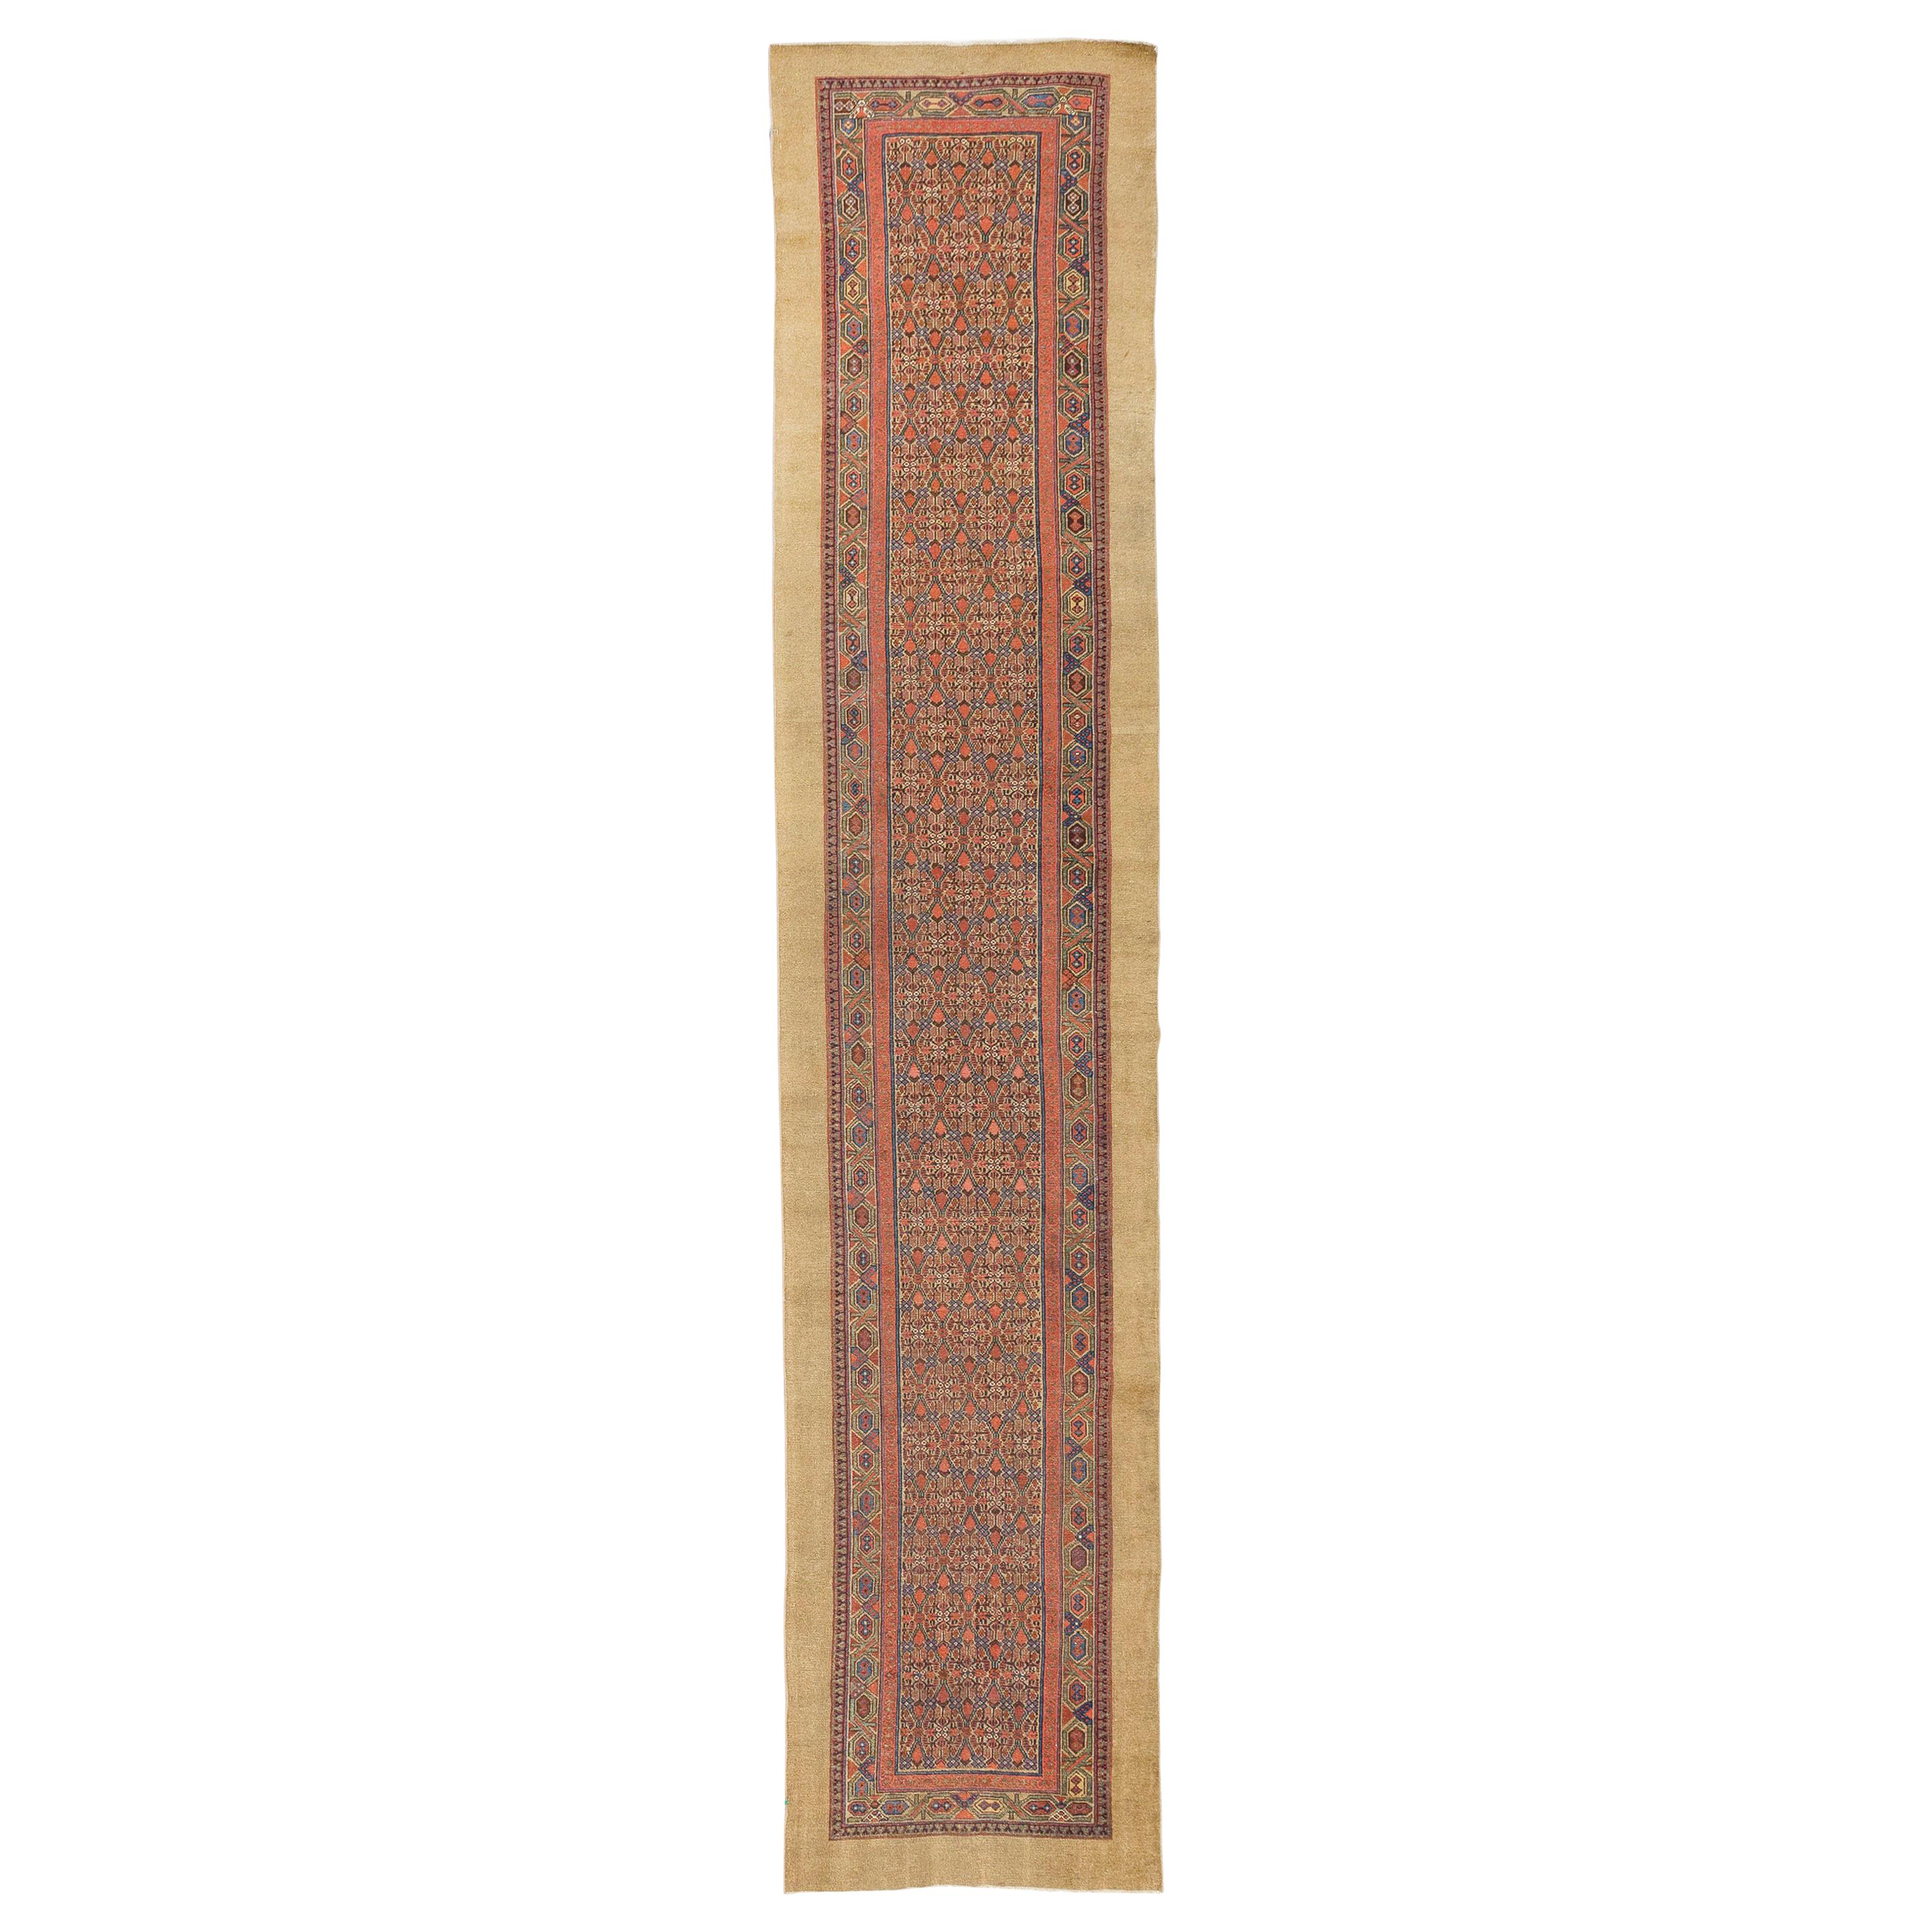 Antique Persian Sarab Runner Rug with Navy and Brown Tribal Details